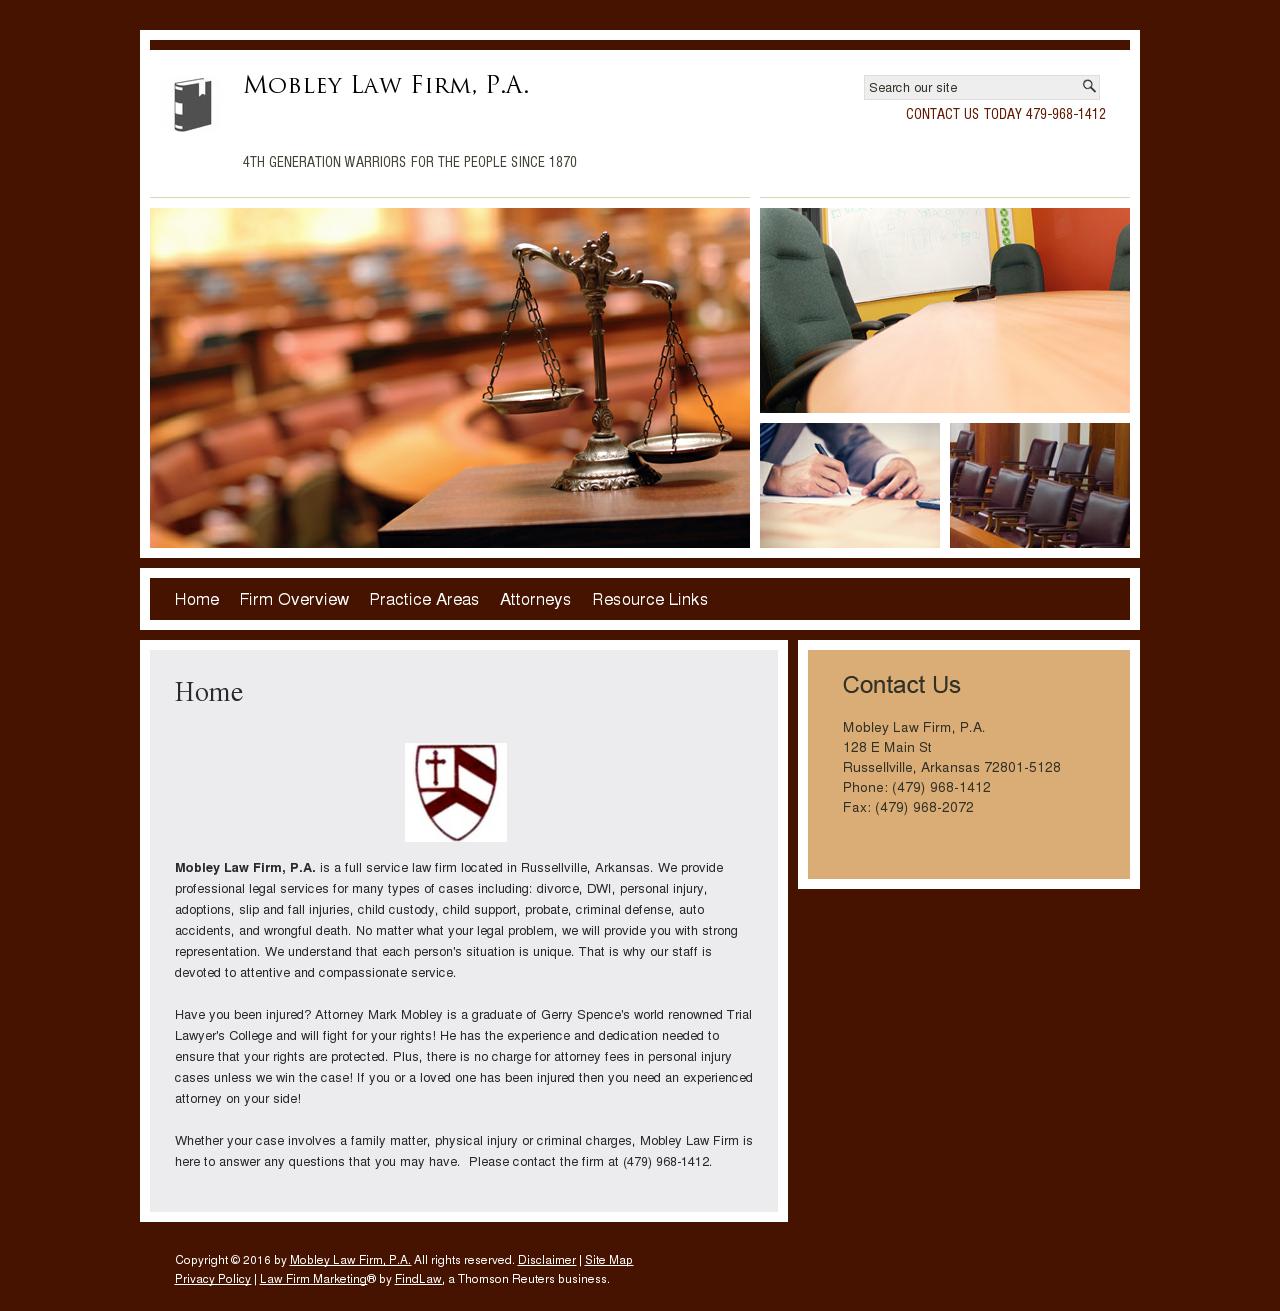 Mobley Law Firm, P.A. - Russellville AR Lawyers